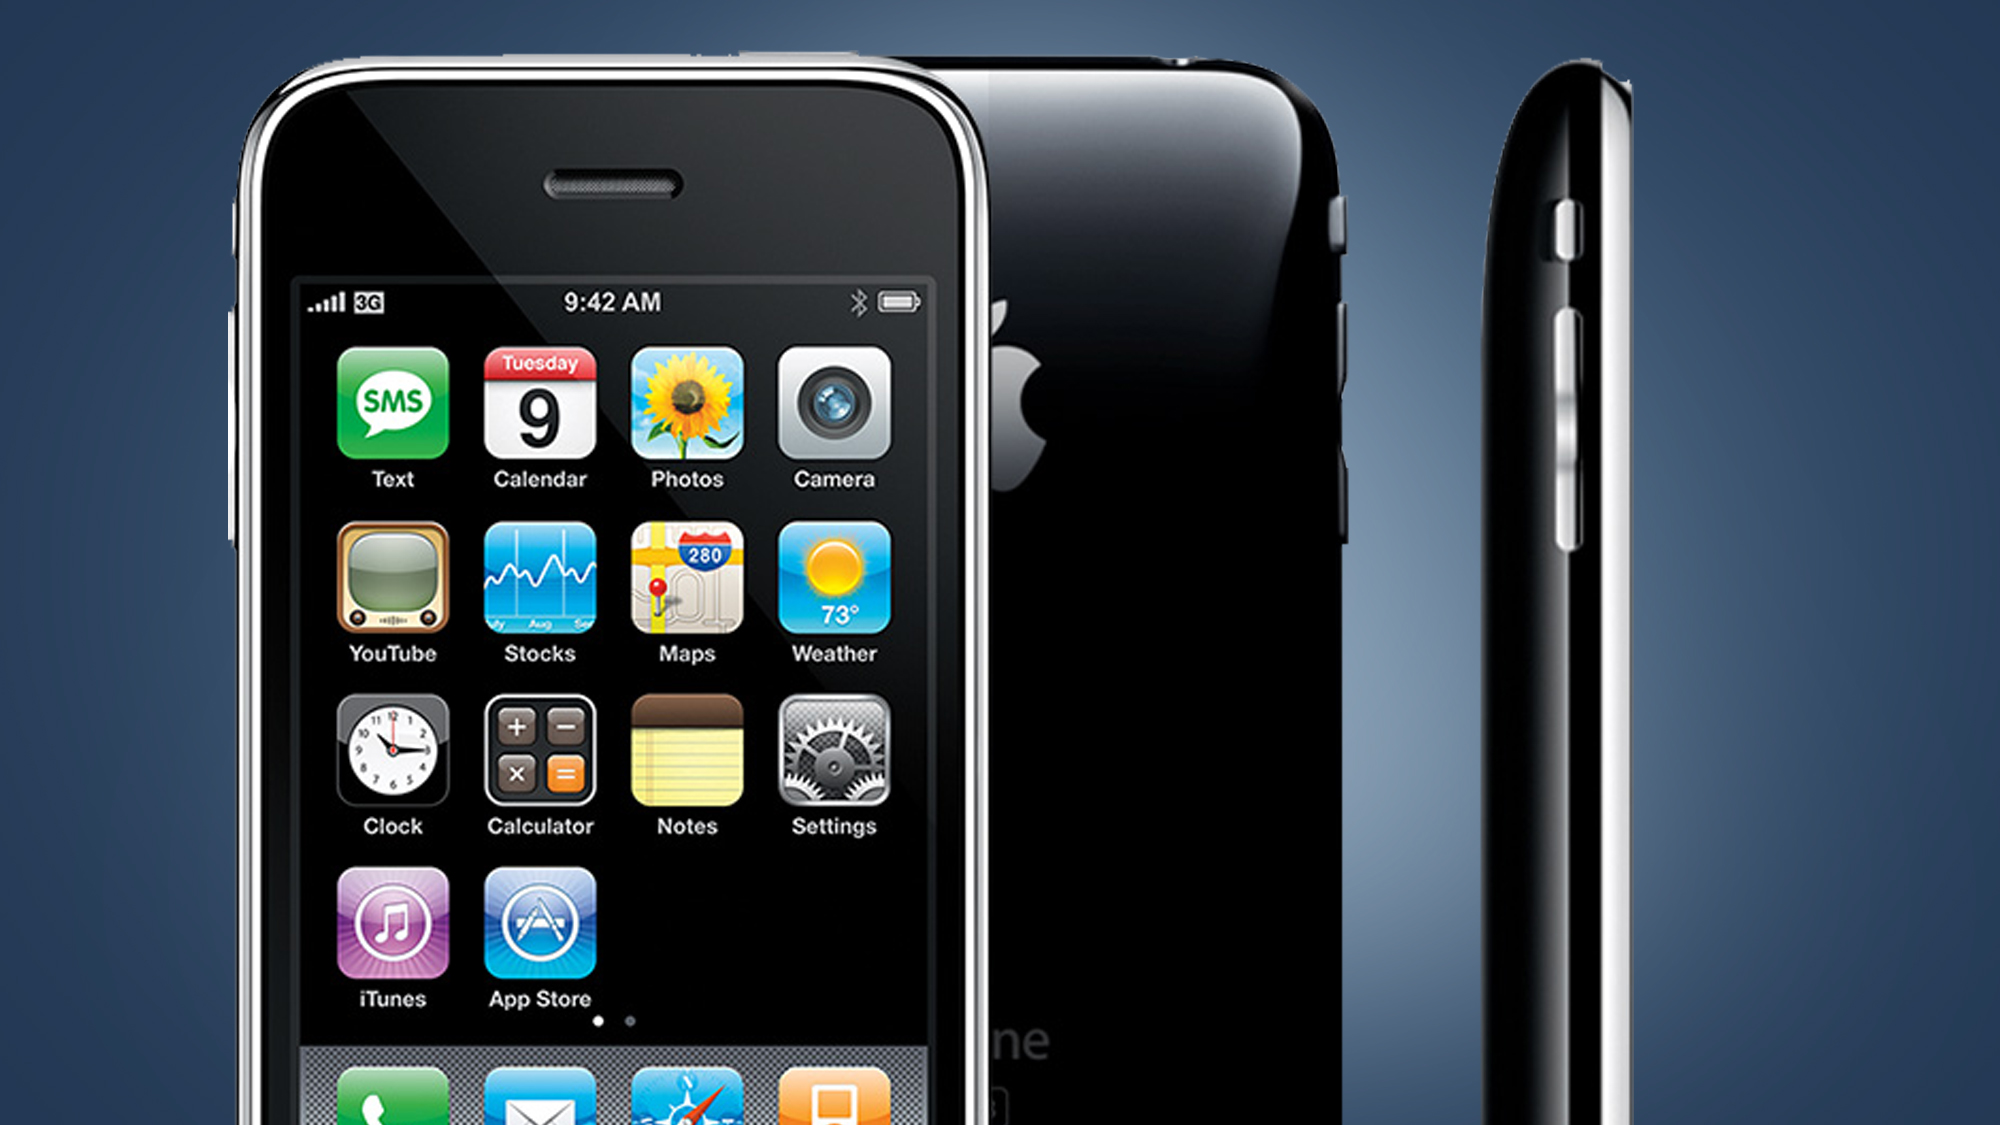 The front and side of the iPhone 3G on a blue background